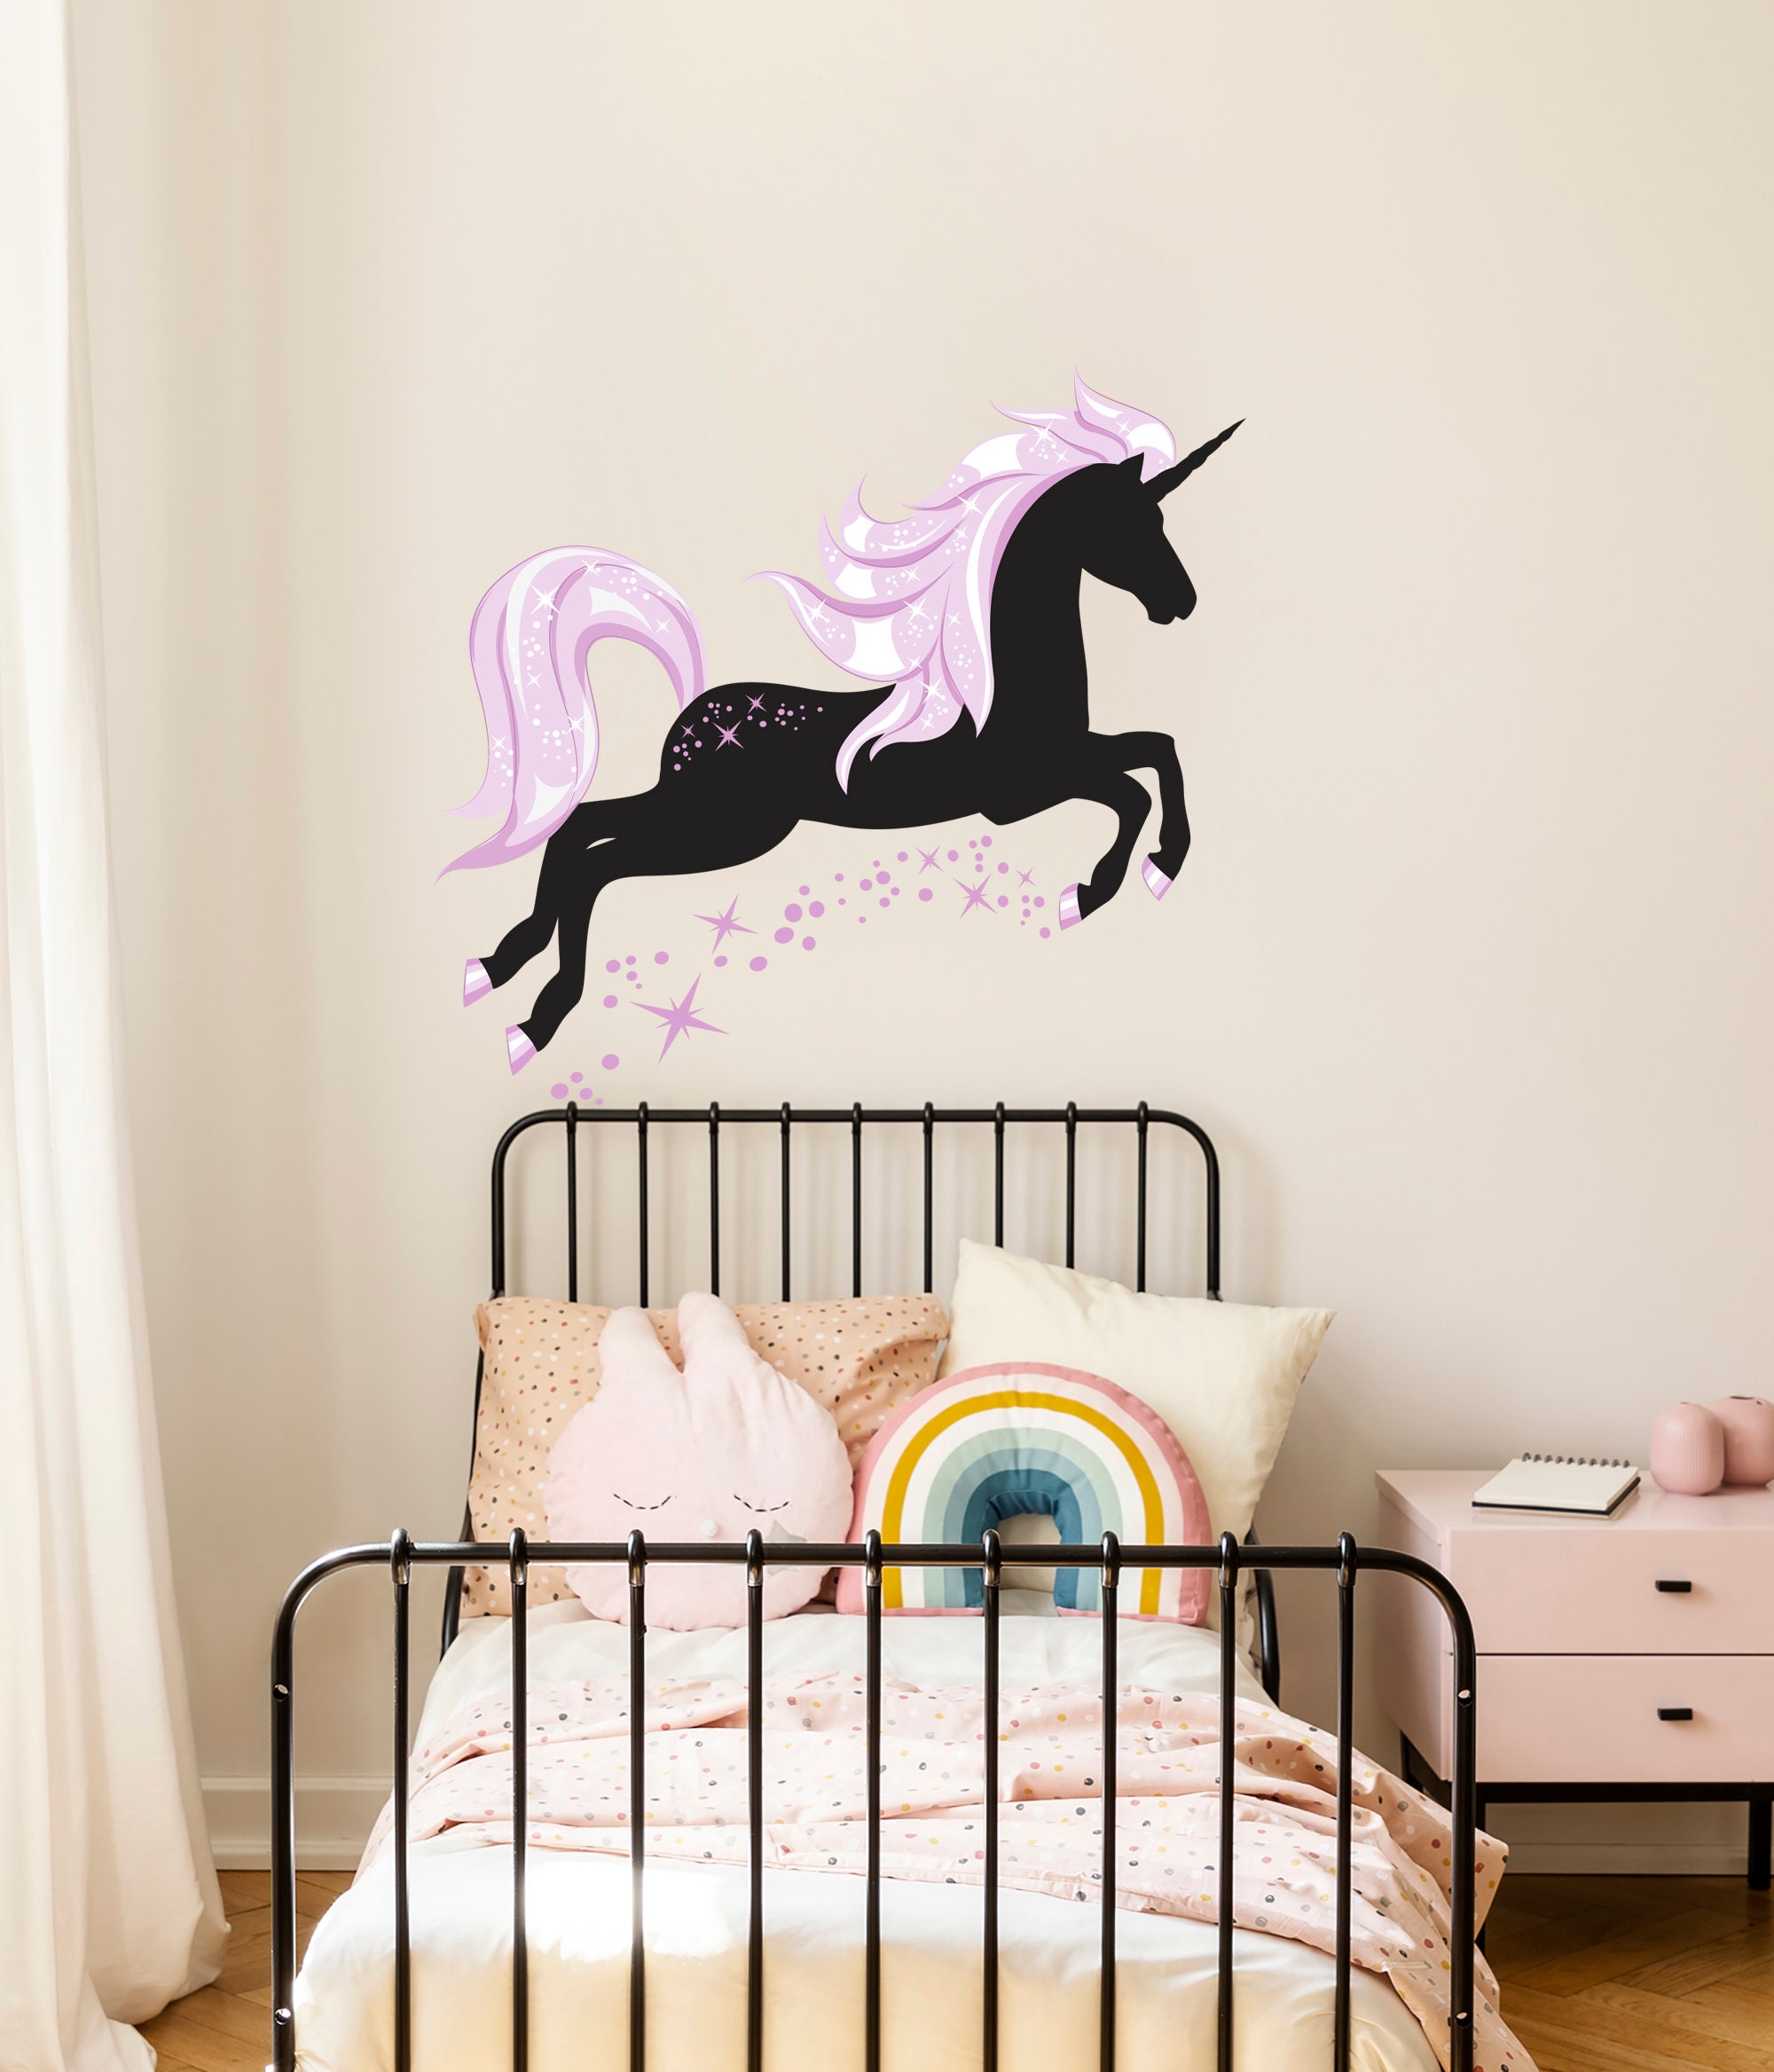 Buy 3D Stickers Space Unicorn Smile Face High Quality PVC material –